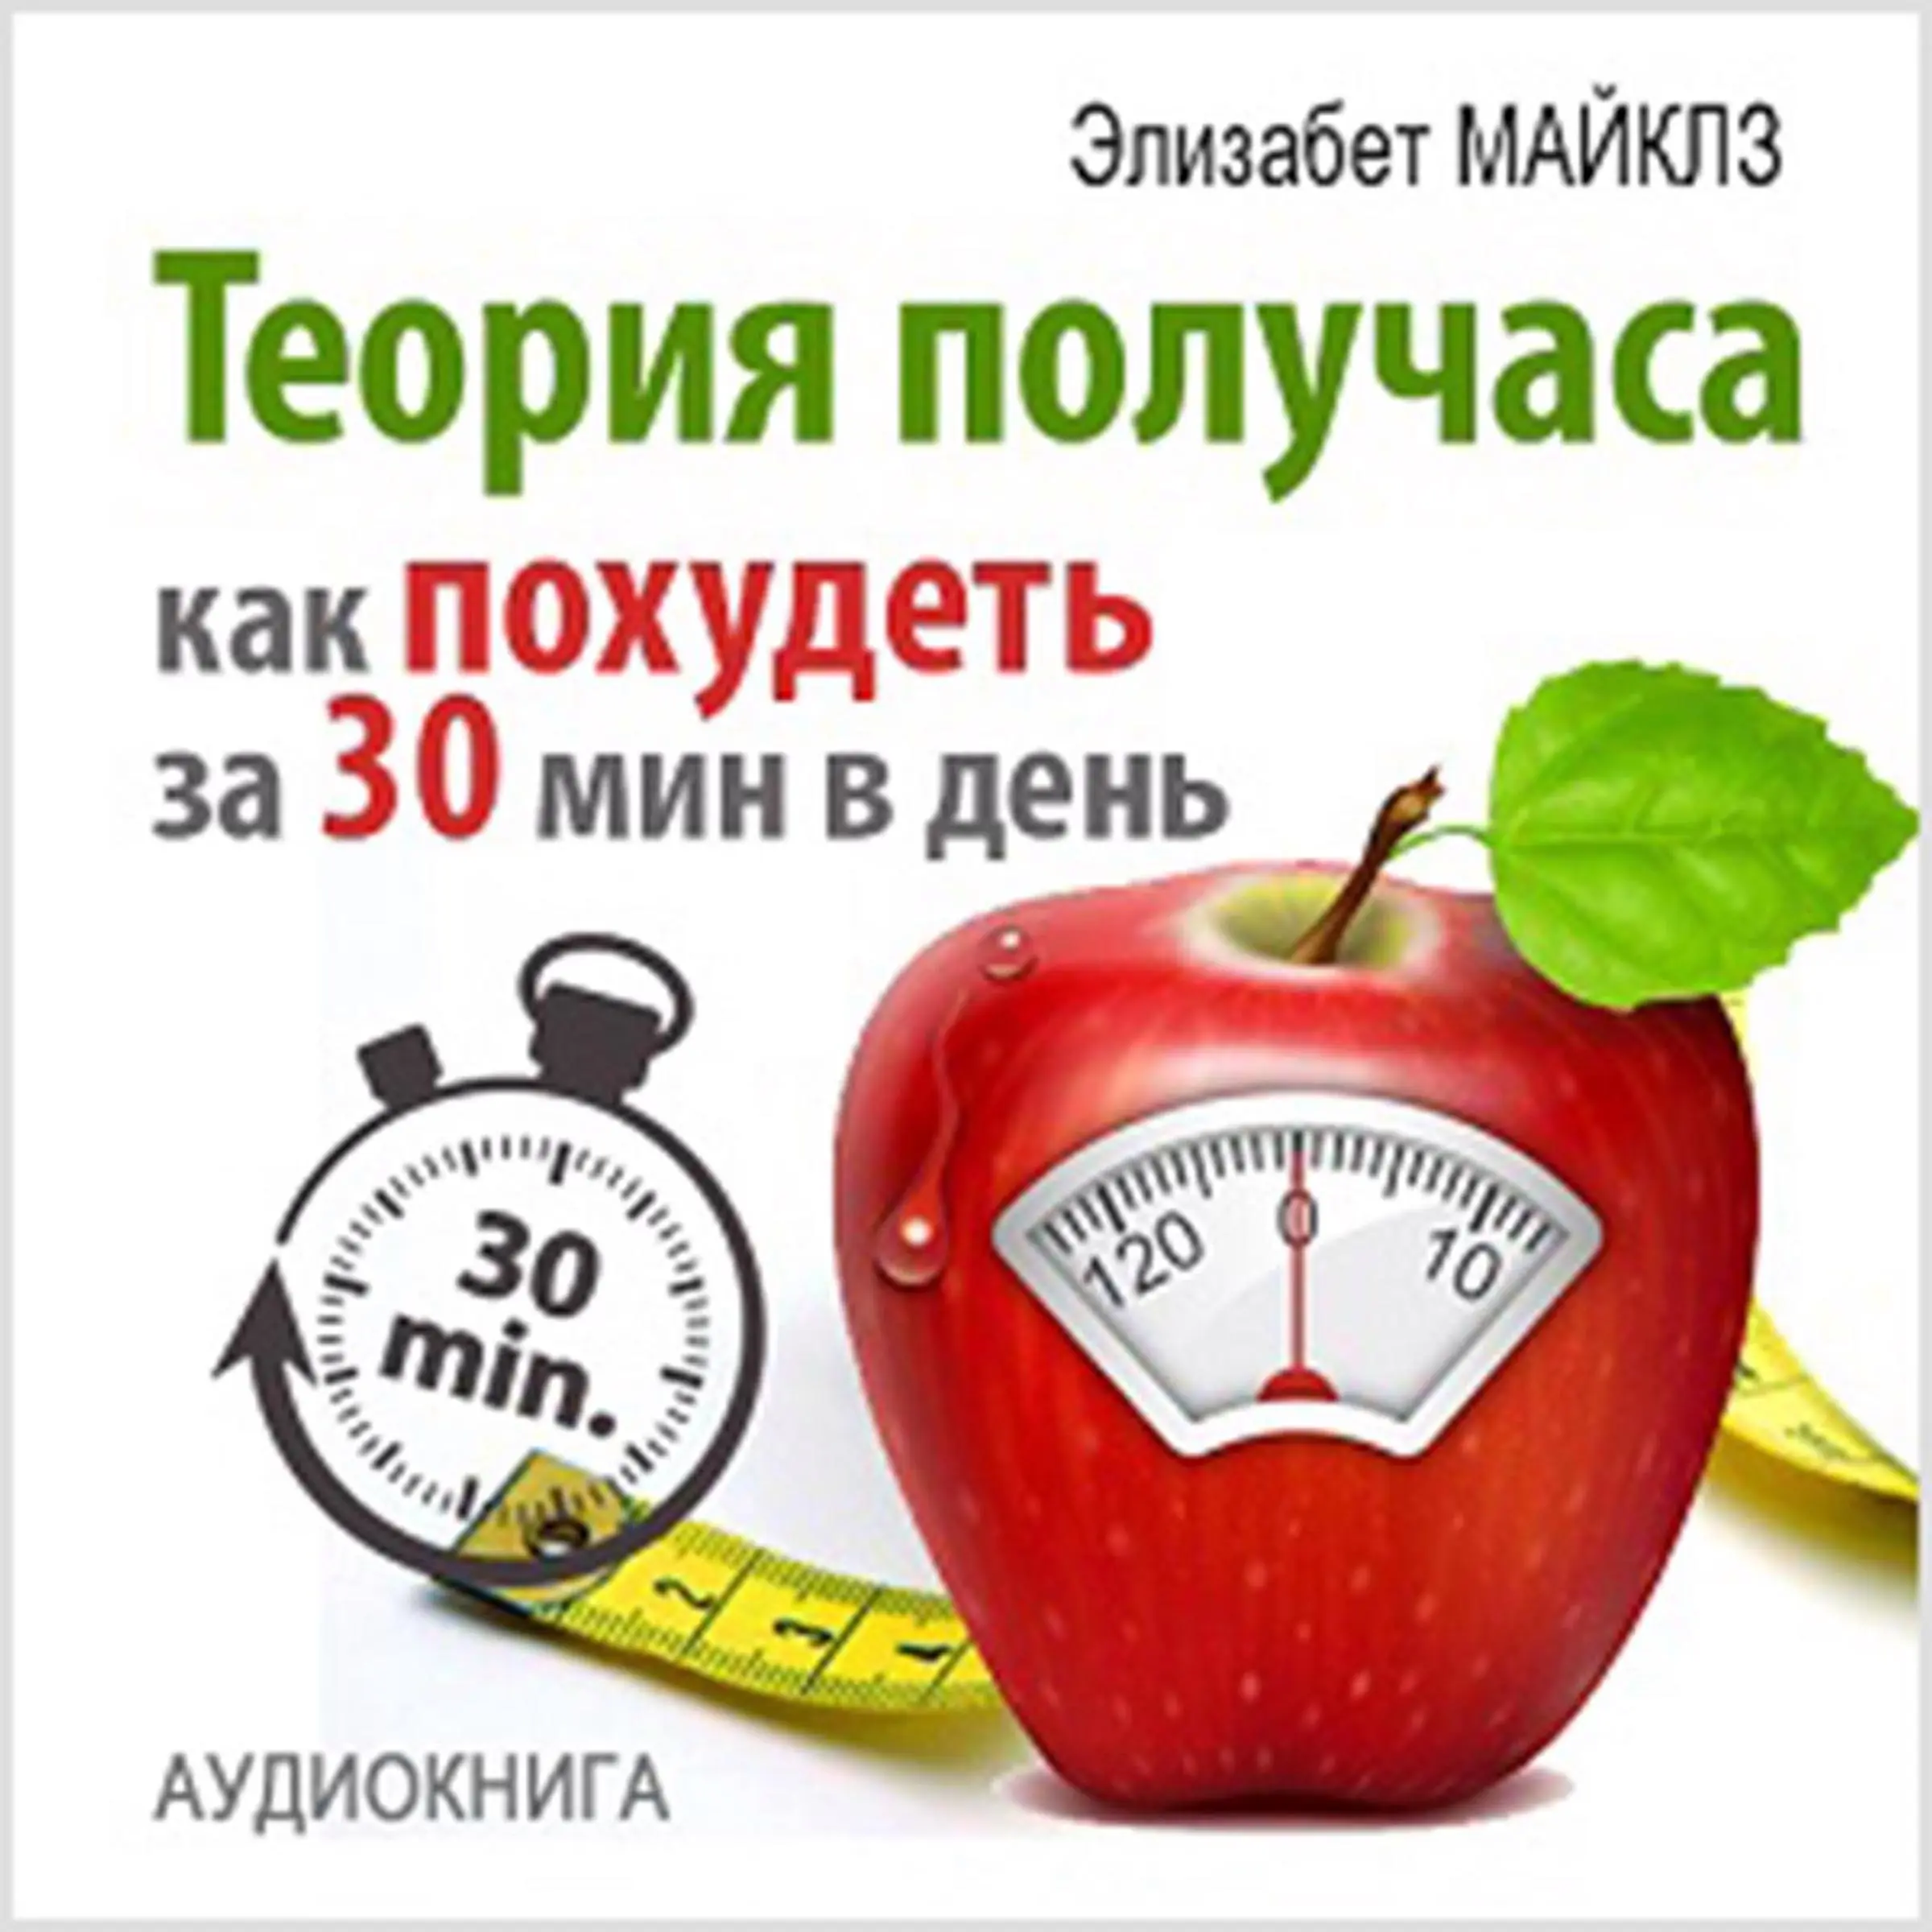 The Half Hour Method: How to Lose Weight in 30 Minutes a Day [Russian Edition] Audiobook by Elizabet Mayklz